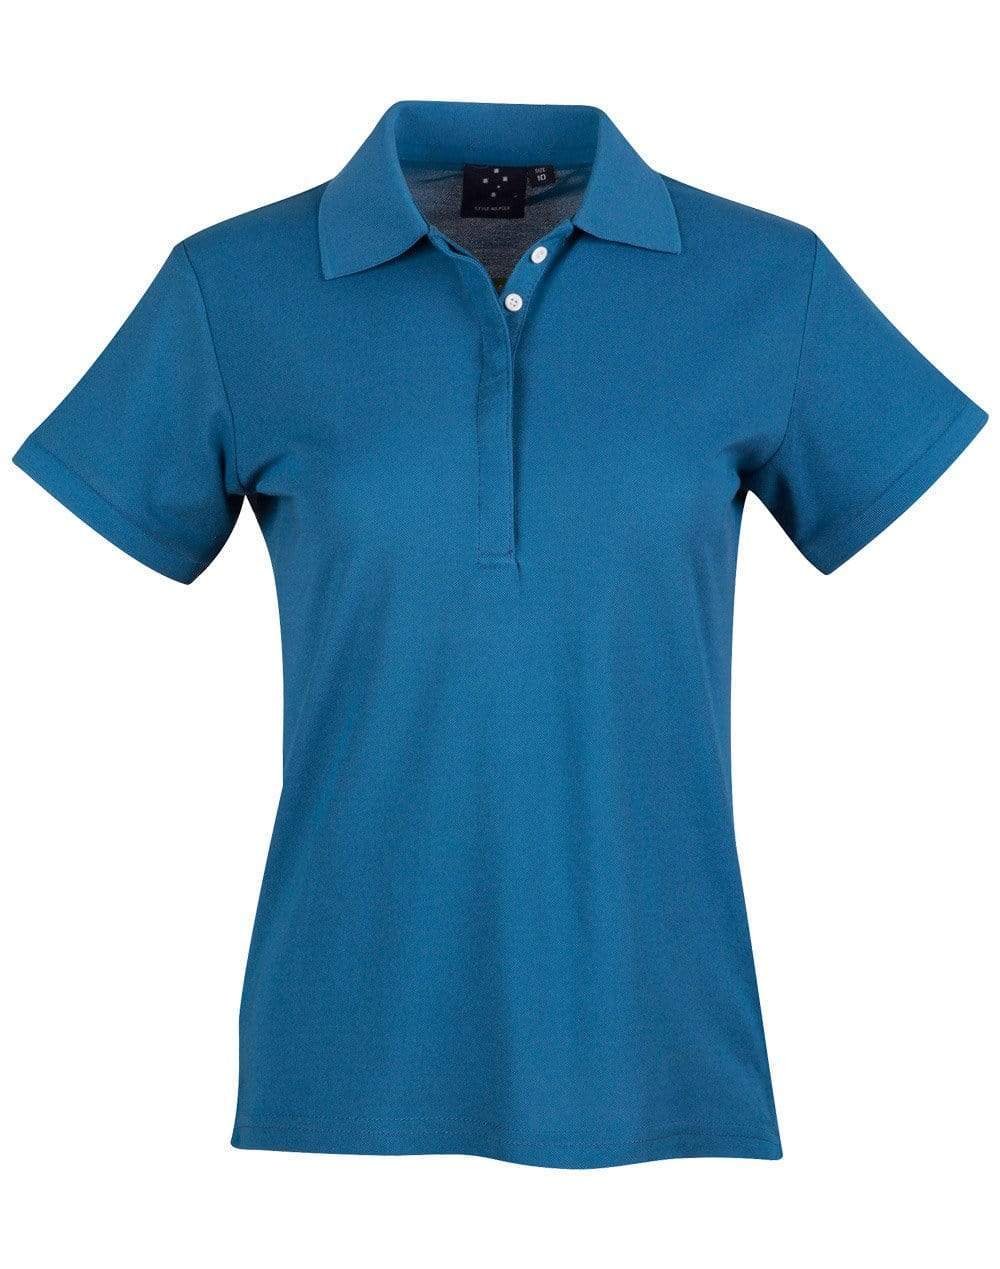 Connection Polo Ladies' Ps64 Casual Wear Winning Spirit Cobalt Blue 8 